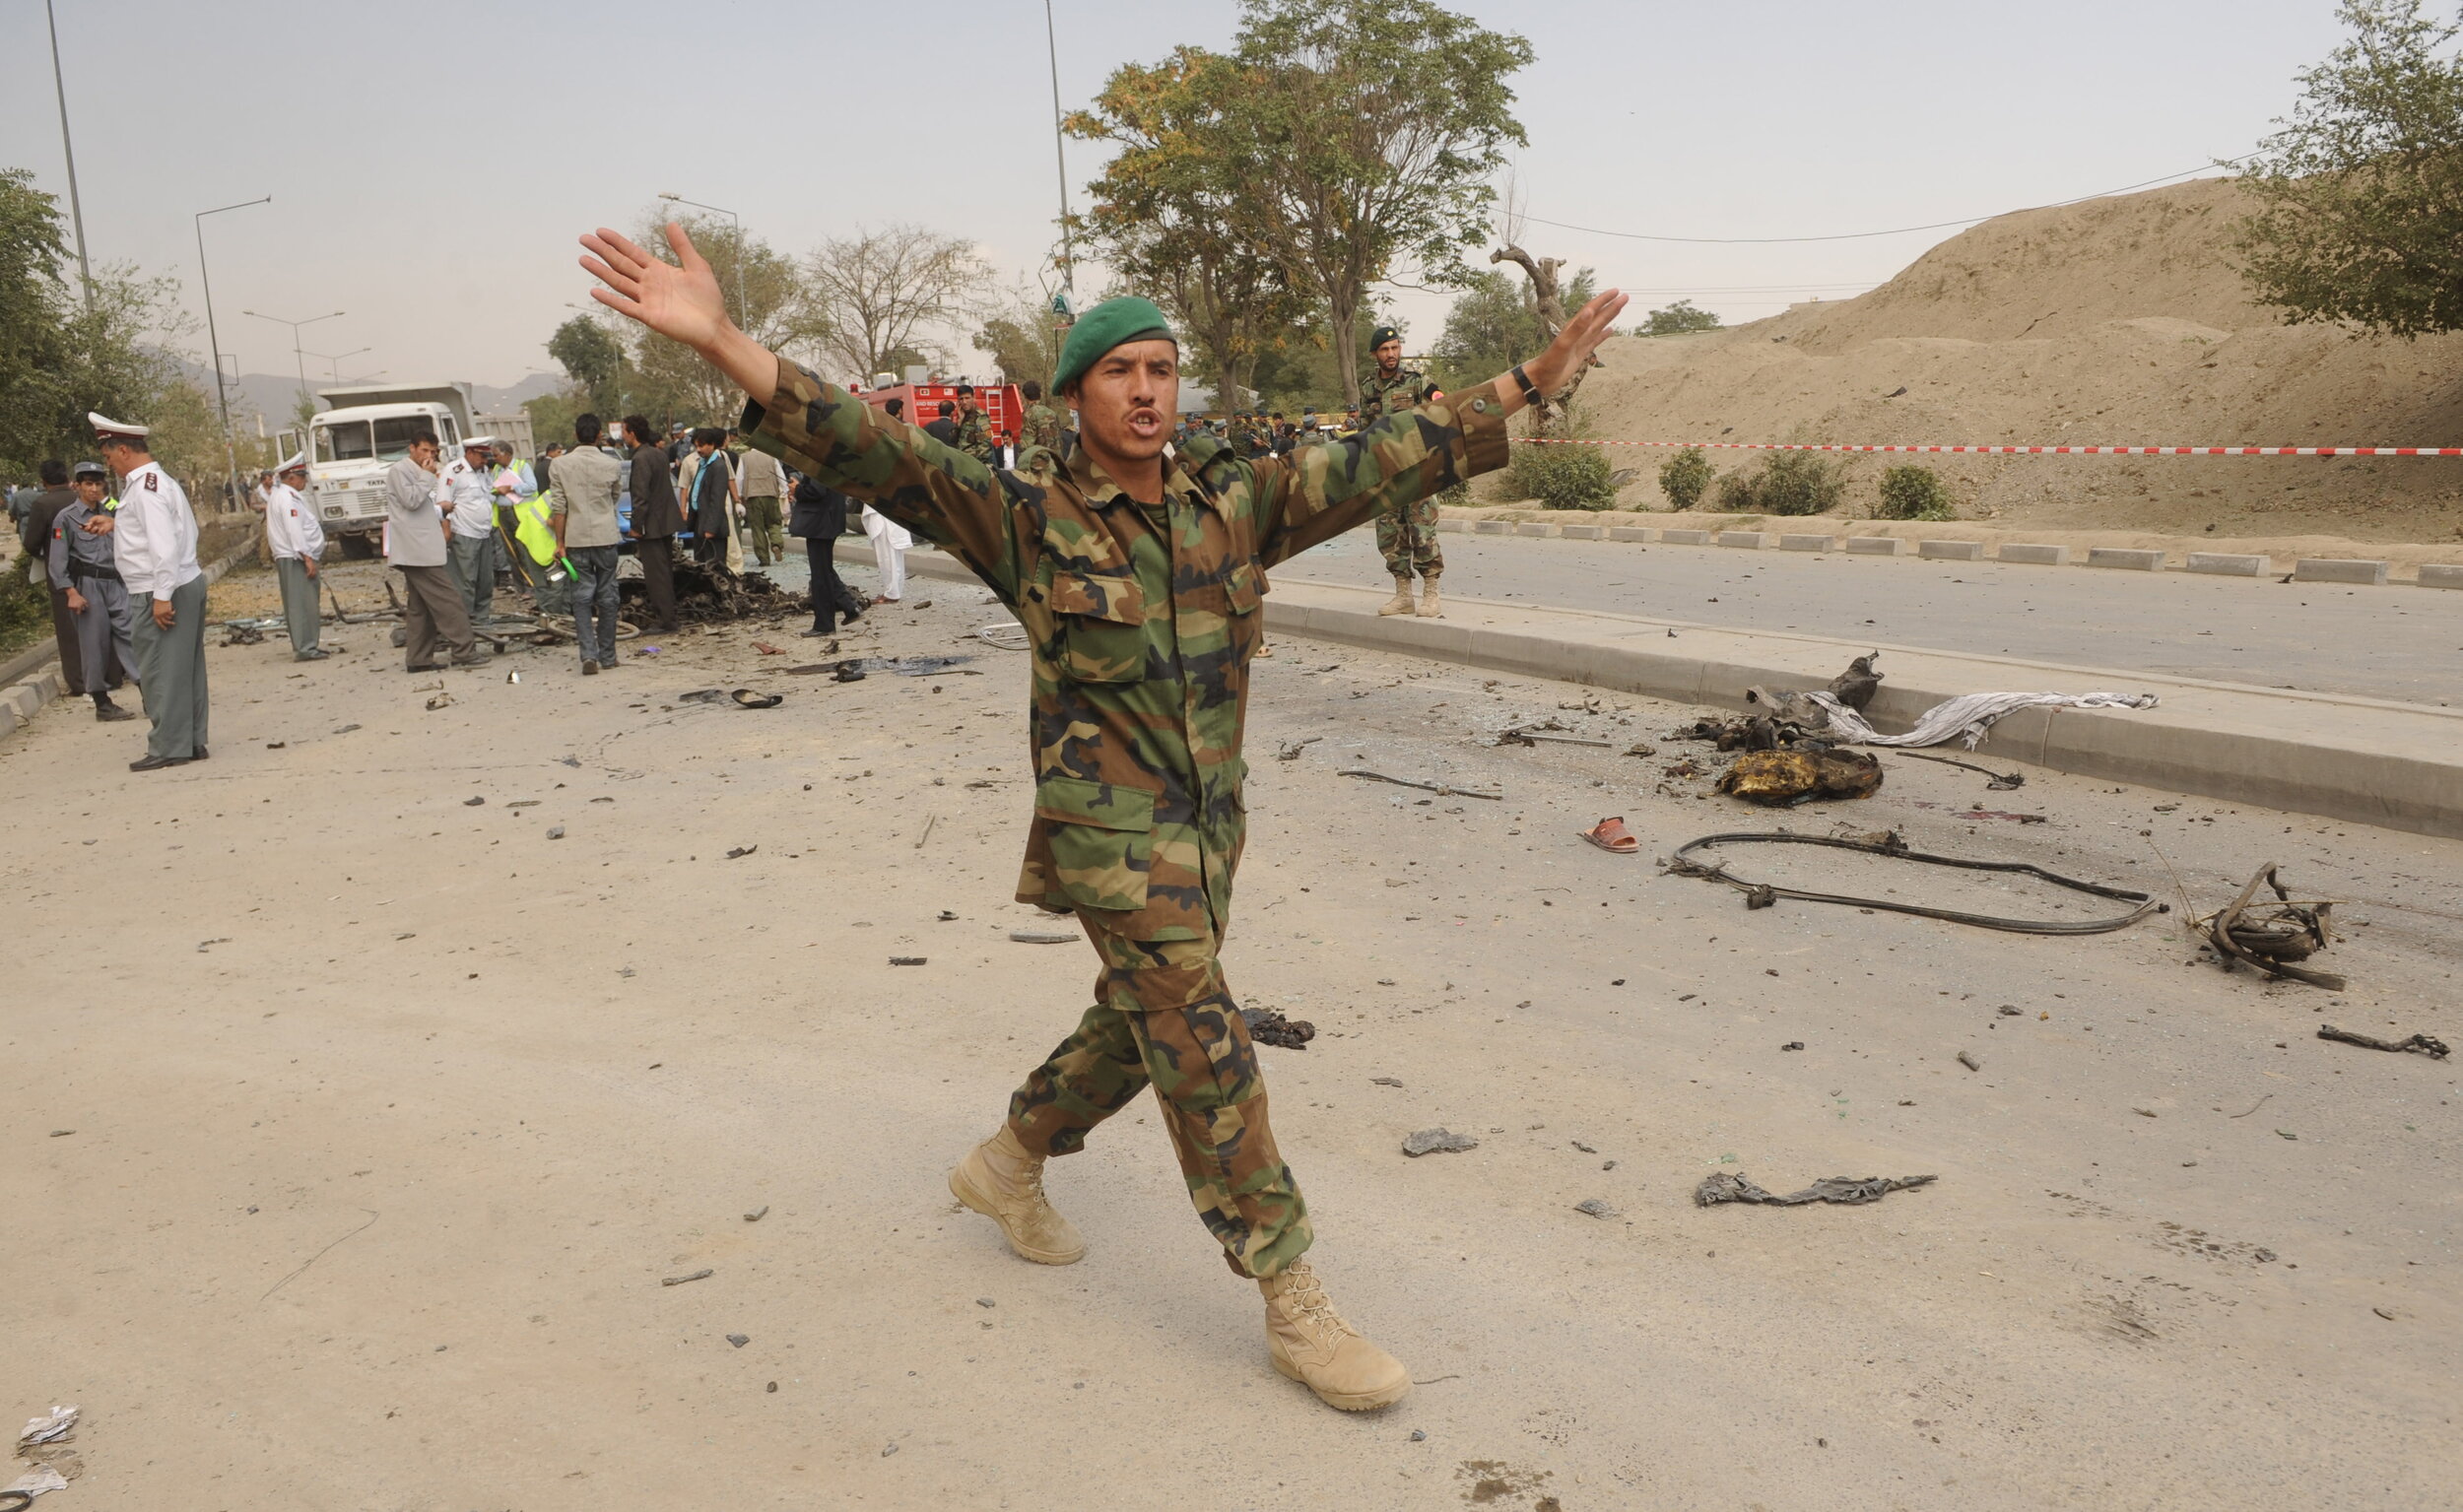  Afghan National Army (ANA) soldier shouts at the site of a blast which struck vehicles of the NATO-led force in Afghan capital Kabul on September 17, 2009. AFP PHOTO/MASSOUD Hossaini  